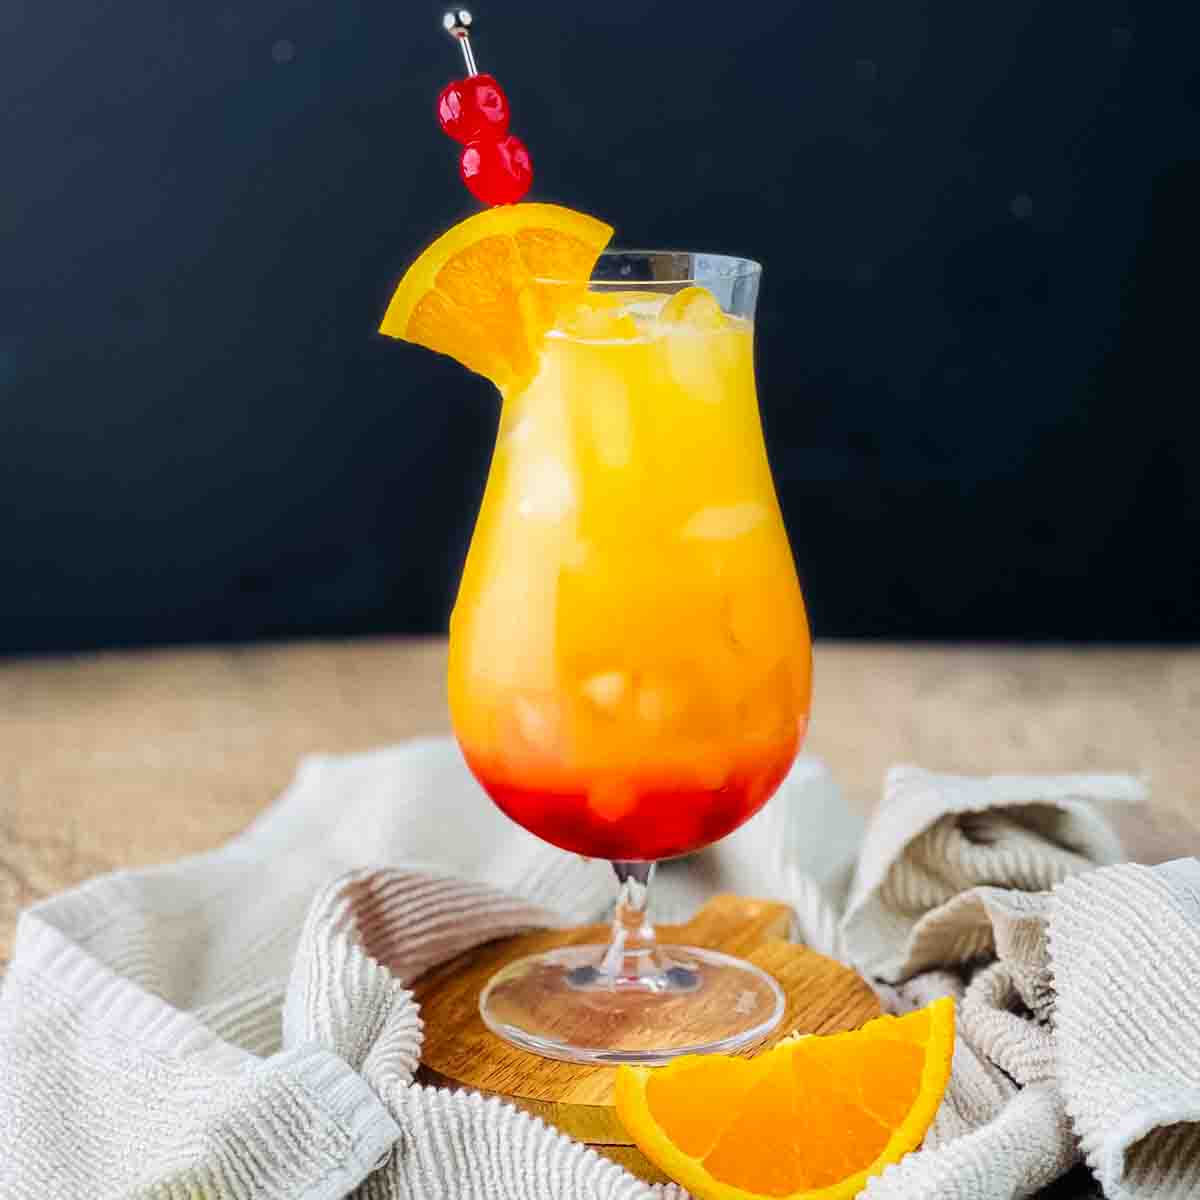 A sunset cocktail in a hurricane glass, showing off the sunset gradient of colors, garnished with an orange slice.